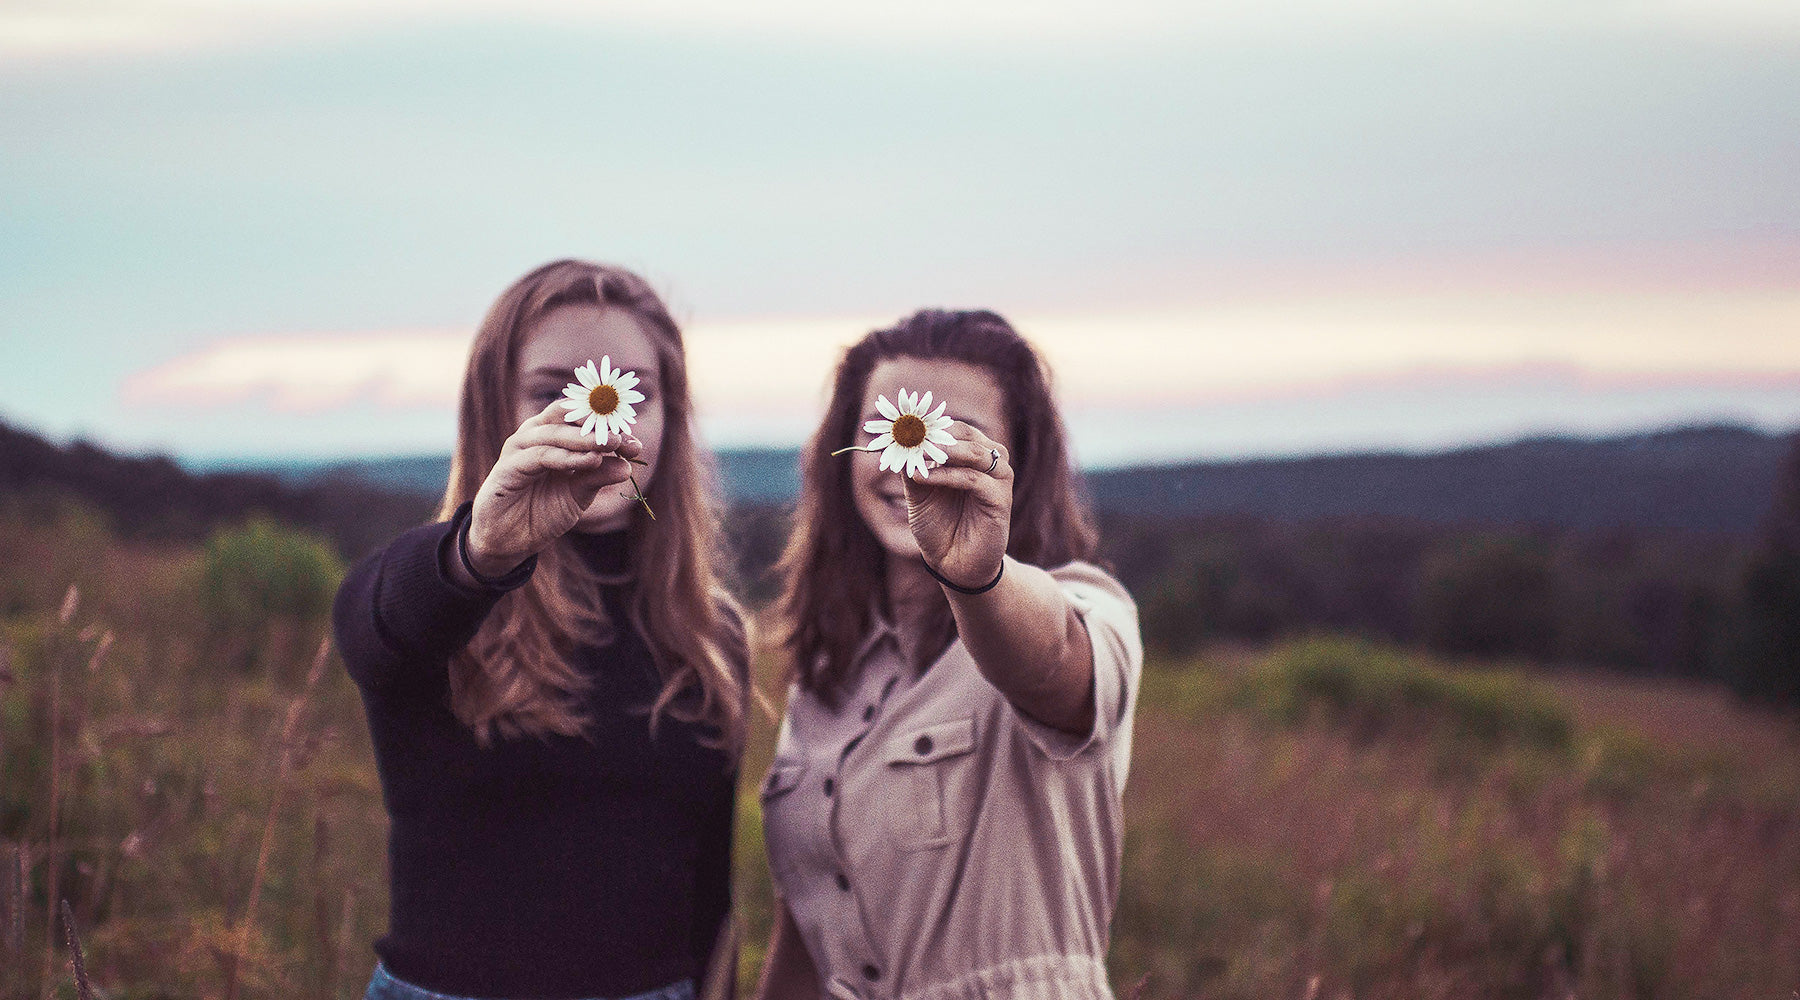 Two girls holding daisies in front of faces